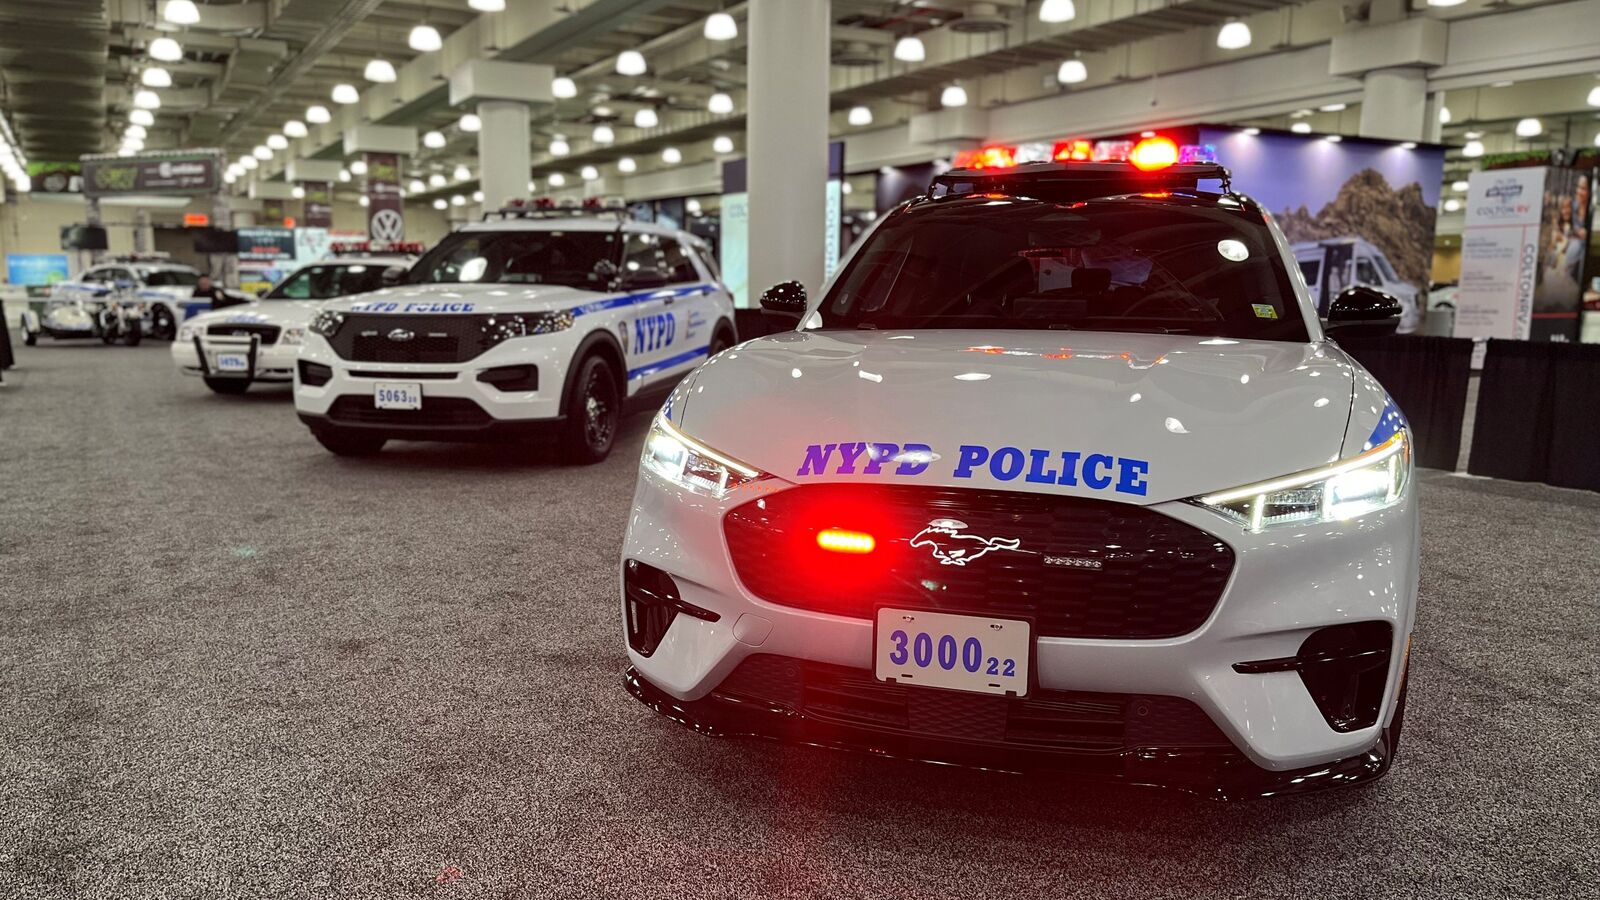 Ford Mustang Mach E Gt Joins Nypd Fleet As New York Police Go Green